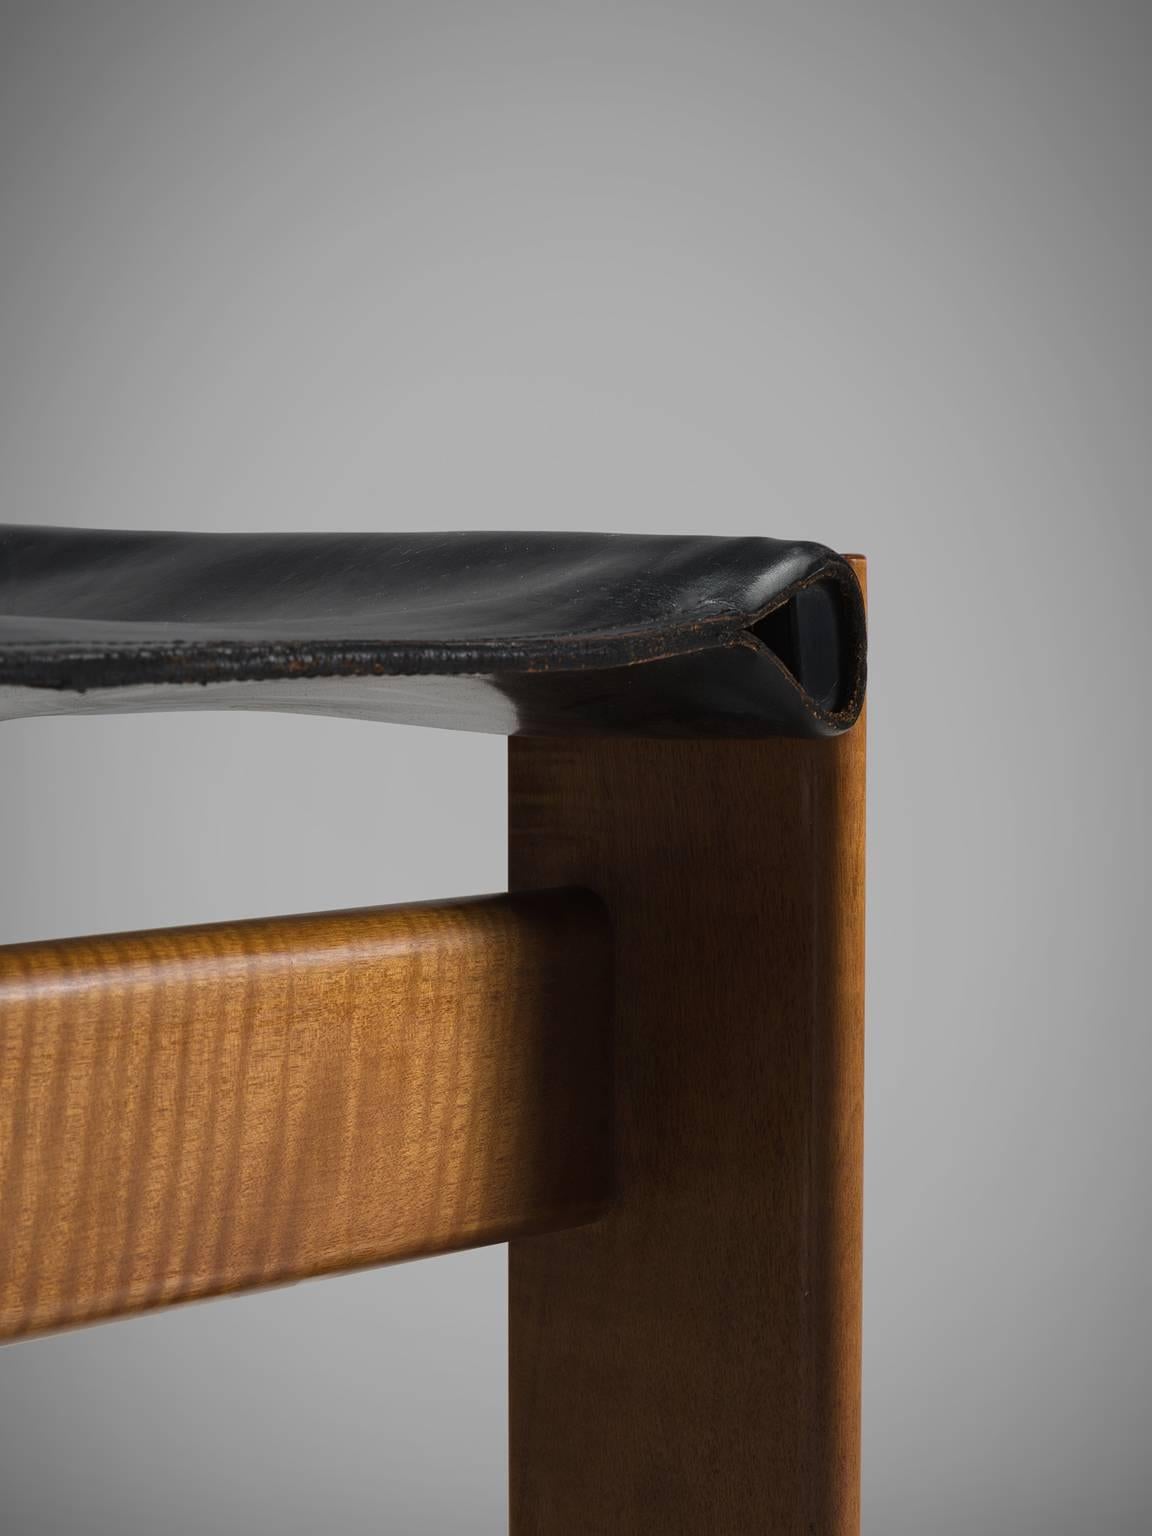 Afra & Tobia Scarpa 'Monk' Chairs in Black Leather 1